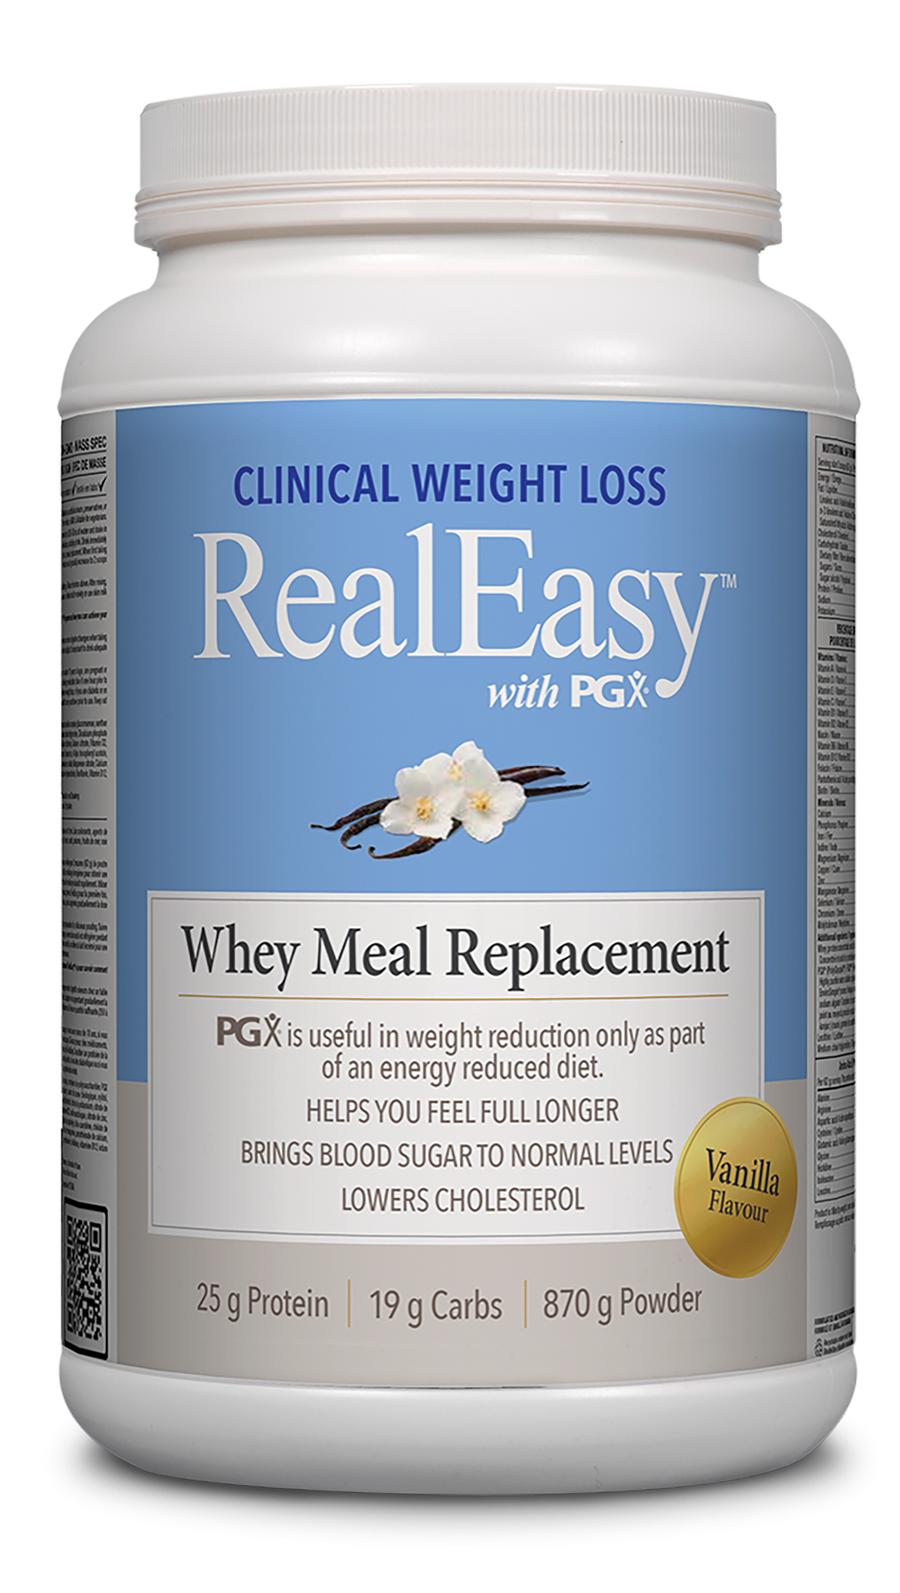 Natural Factors RealEasy with PGX Whey Meal Replacement Vanilla Flavour 870g Powder